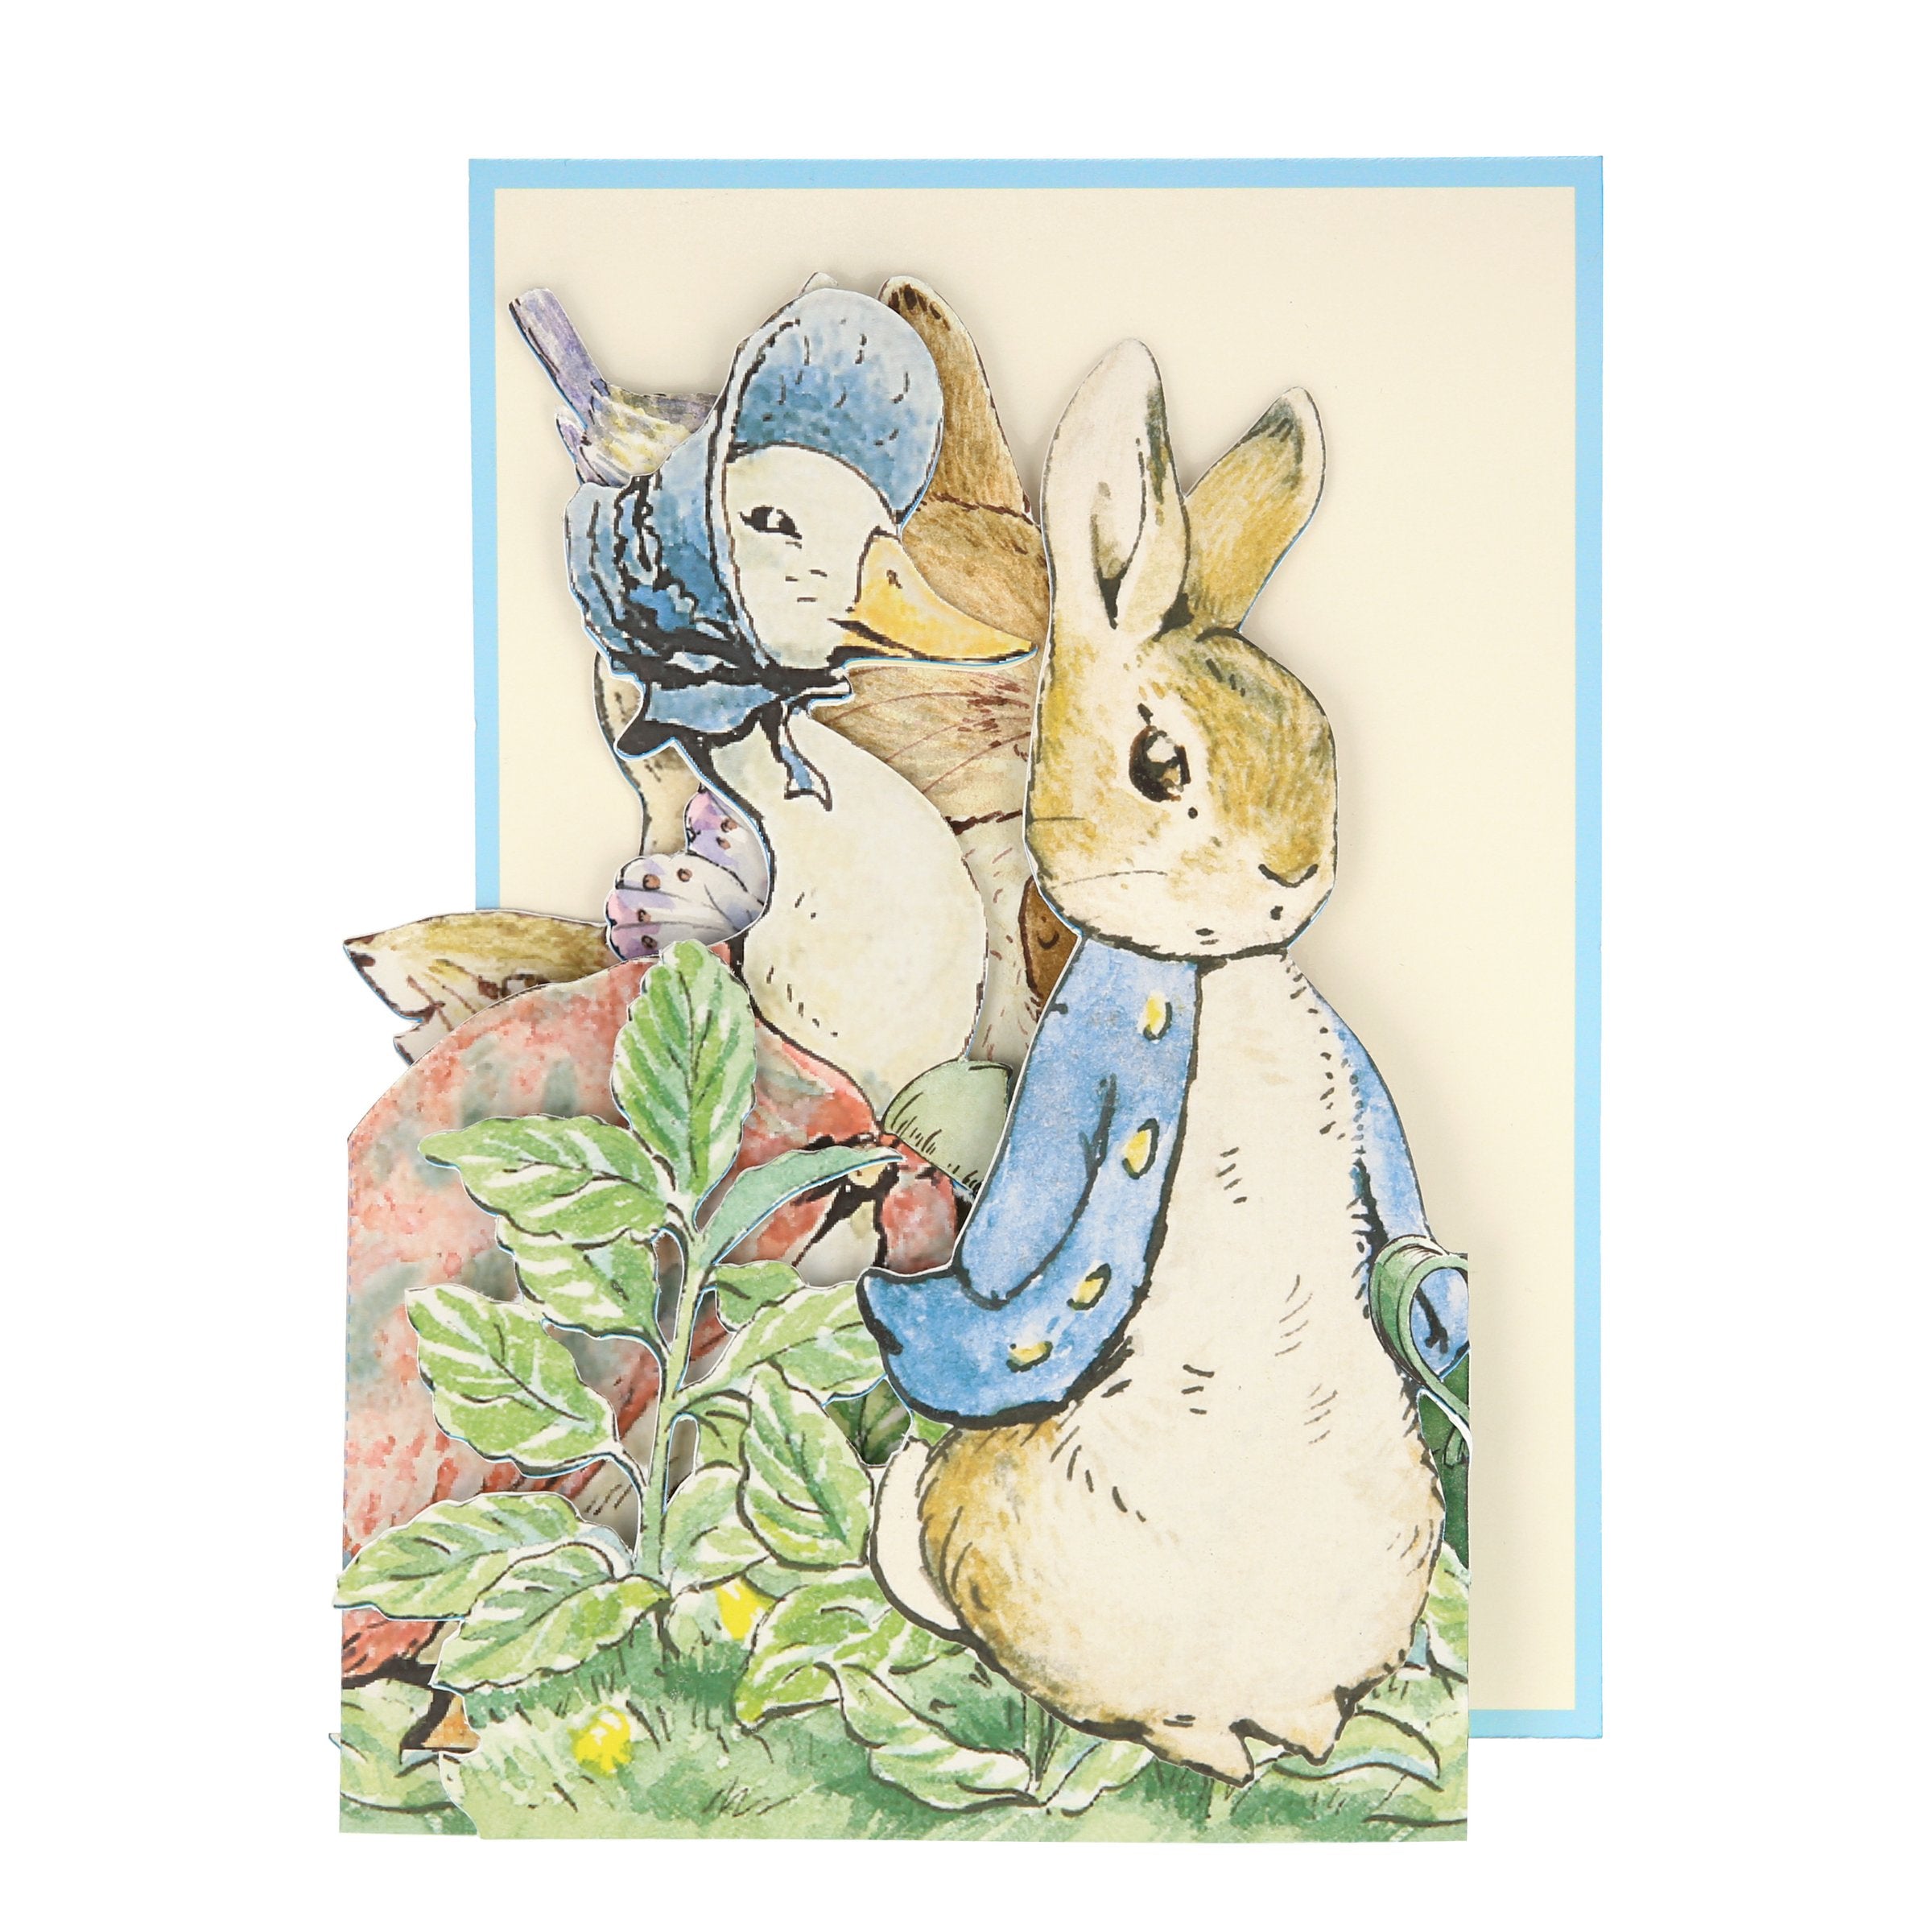 Our special card includes Peter Rabbit and friends, ideal as a best wishes card, or baby shower card.